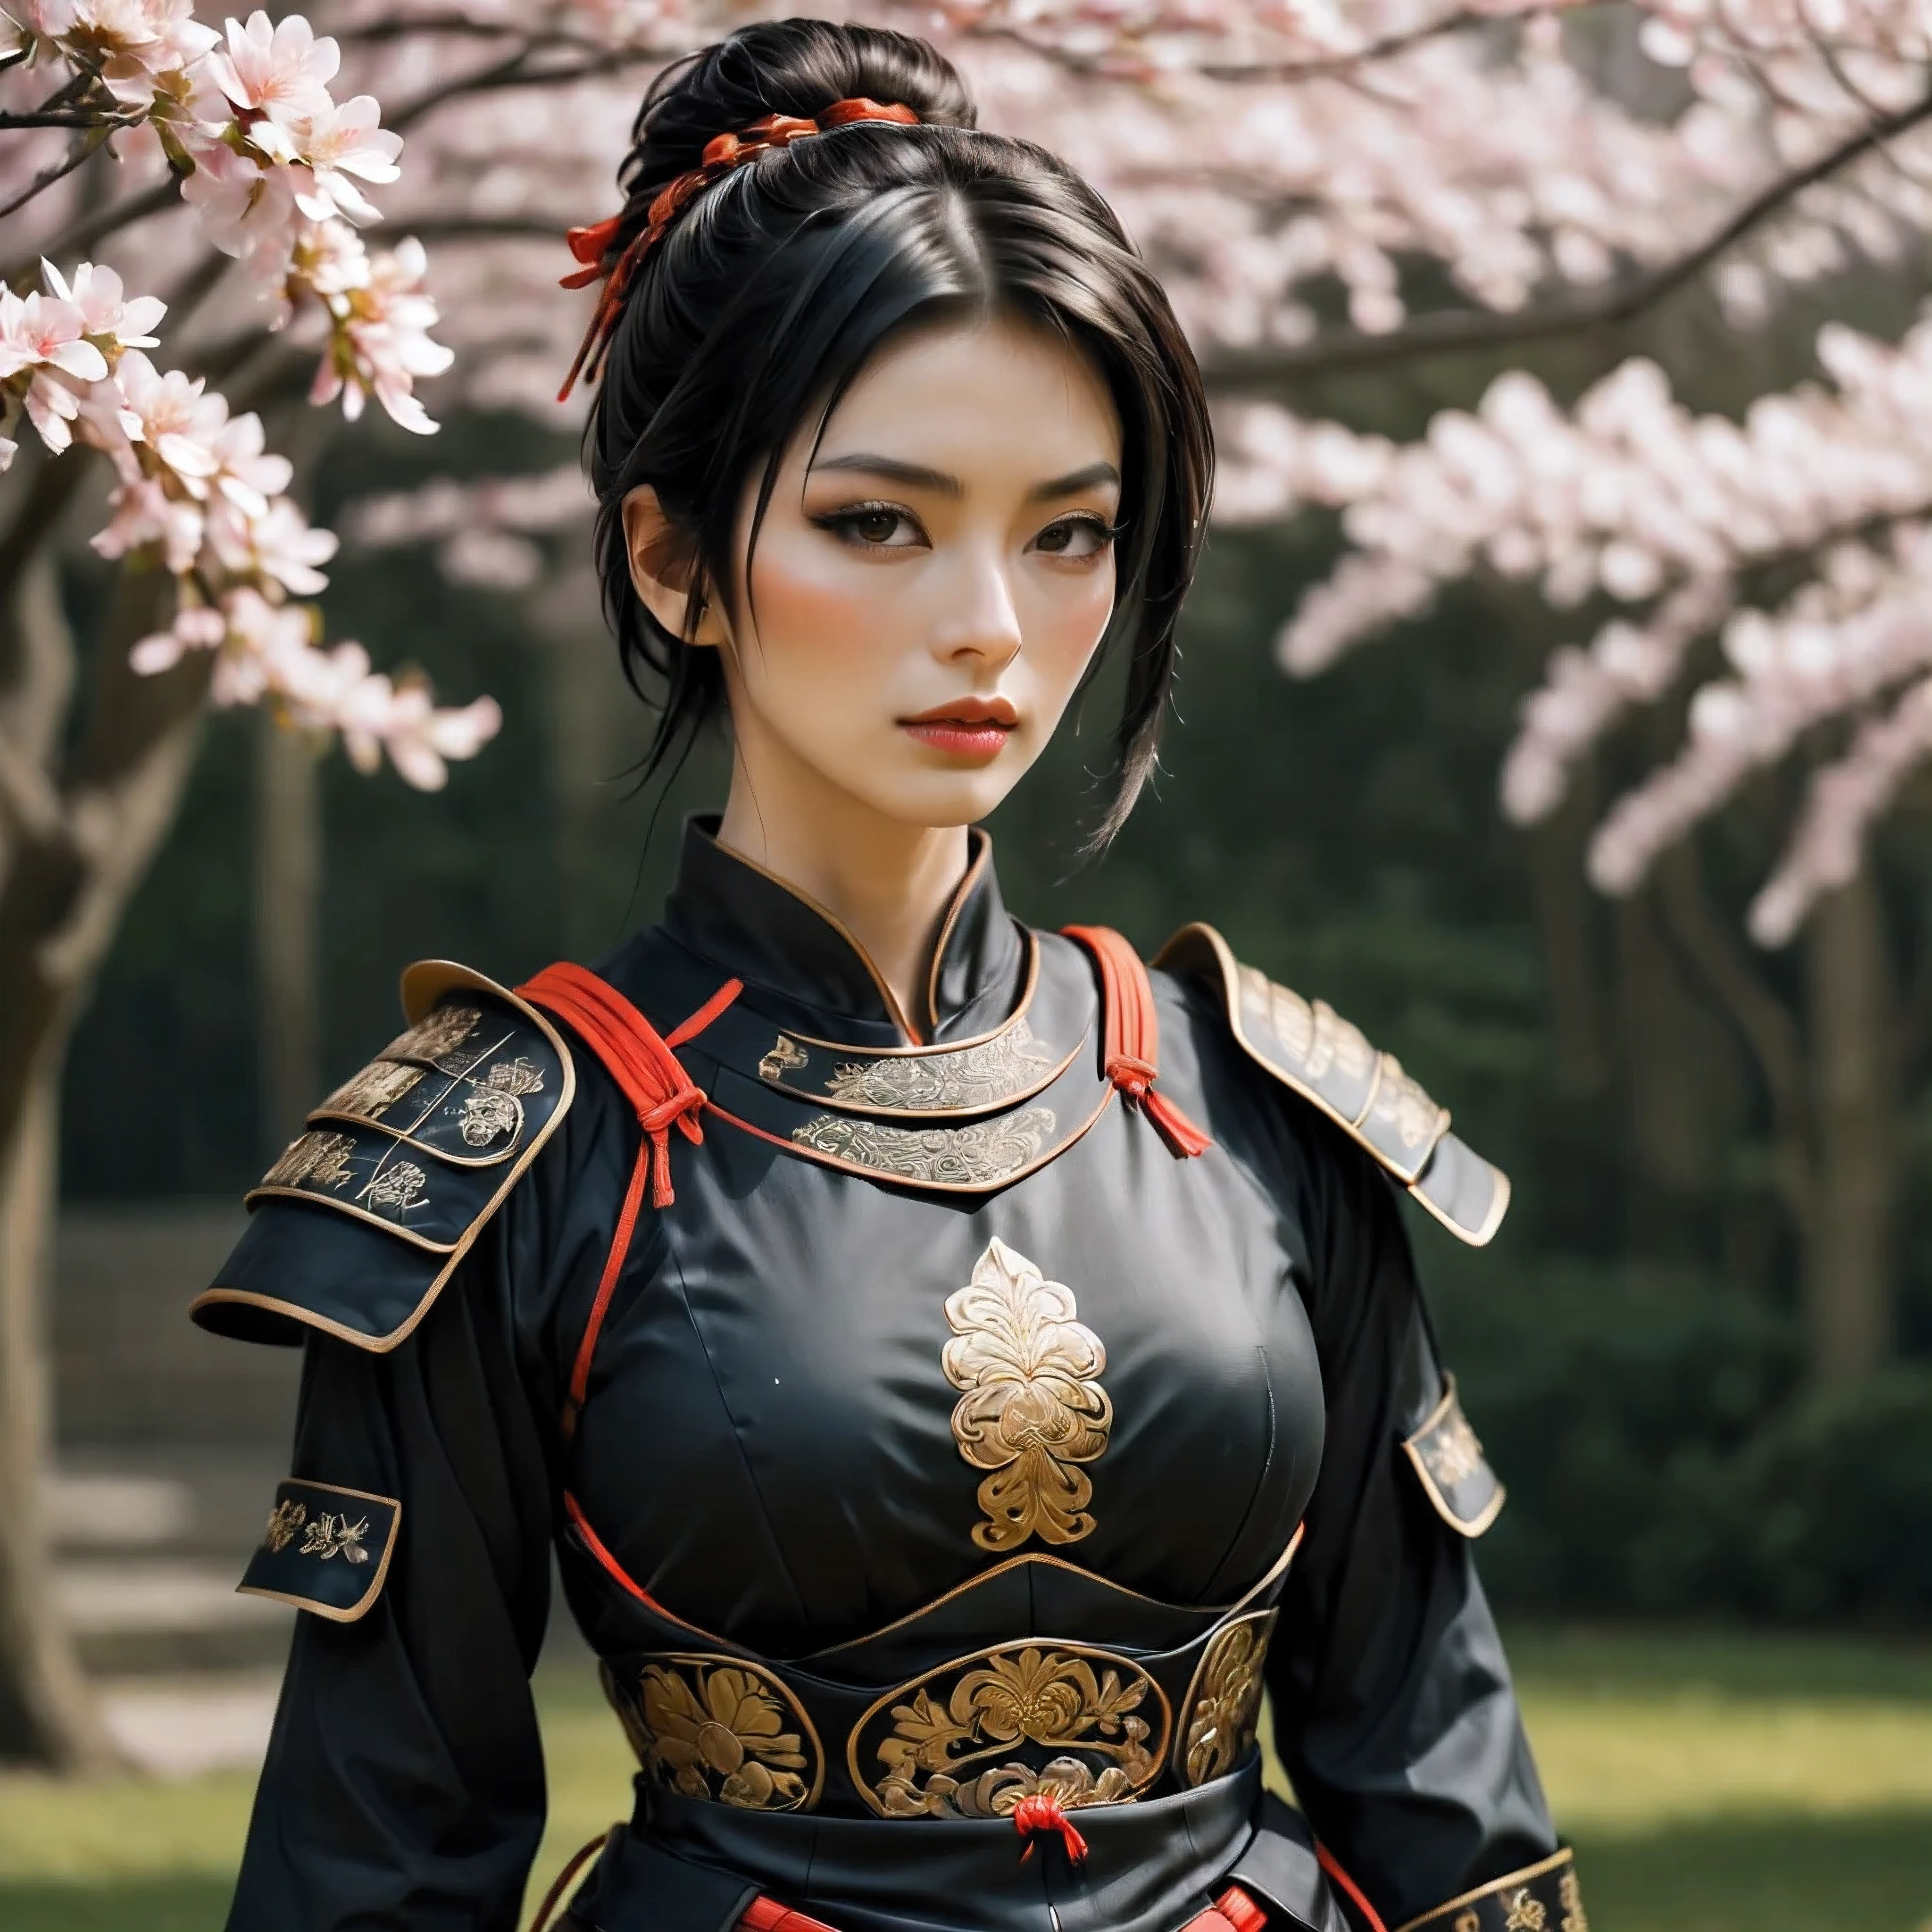 ((Full body):1.1), Photograph of Mature Beauty, golden ratio face, perfect face, fine art piece, smooth lines, Express expressions and postures through color contrast, emphasize light, shadow and space. figurative art, Dress neatly, sexy photograph, background is a sakura flower garden, (best quality, 4K, 8k, high resolution,masterpiece:1.2) ,(actual, photoactual, photo-actual:1.37). | Fresh Japan Beauty, (((Beautiful Black Hair))), (short ponytail hair style), ((beauty marks)), ((wearing samurai armor):1.4).